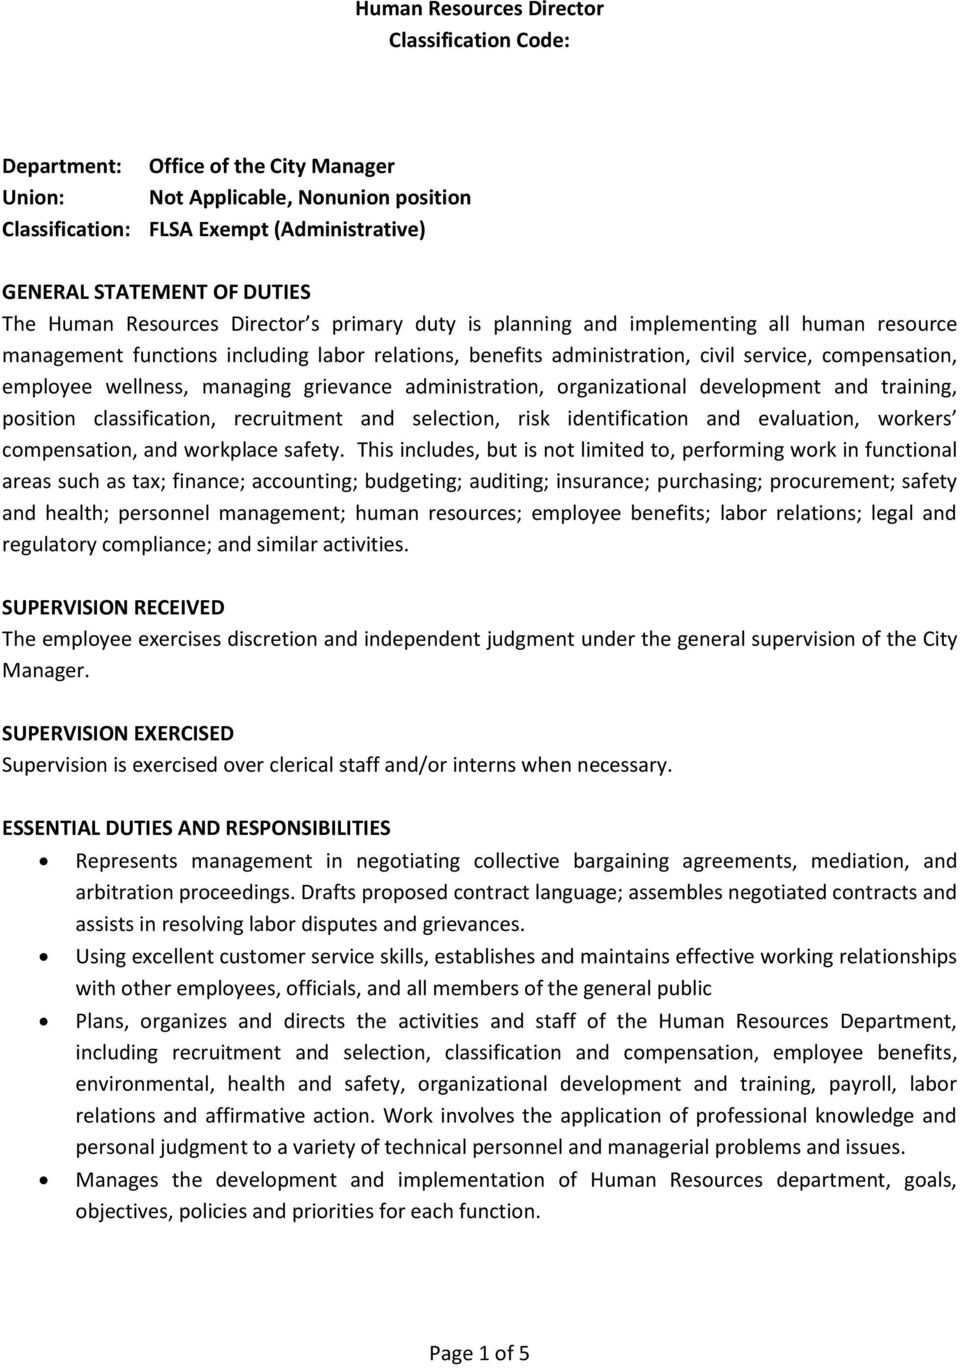 employee wellness, managing grievance administration, organizational development and training, position classification, recruitment and selection, risk identification and evaluation, workers